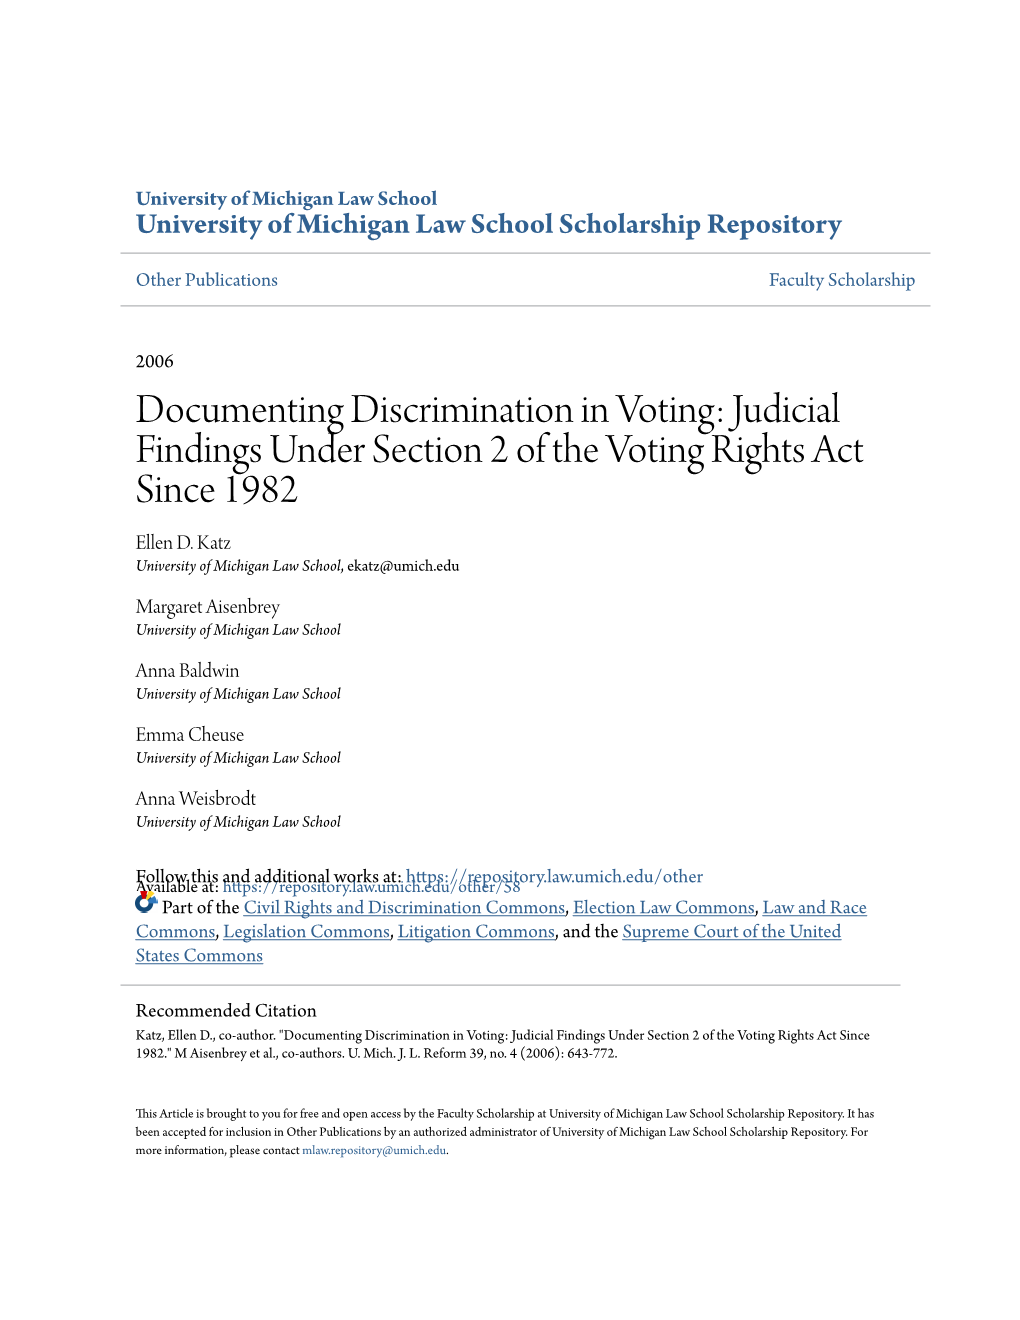 Judicial Findings Under Section 2 of the Voting Rights Act Since 1982 Ellen D